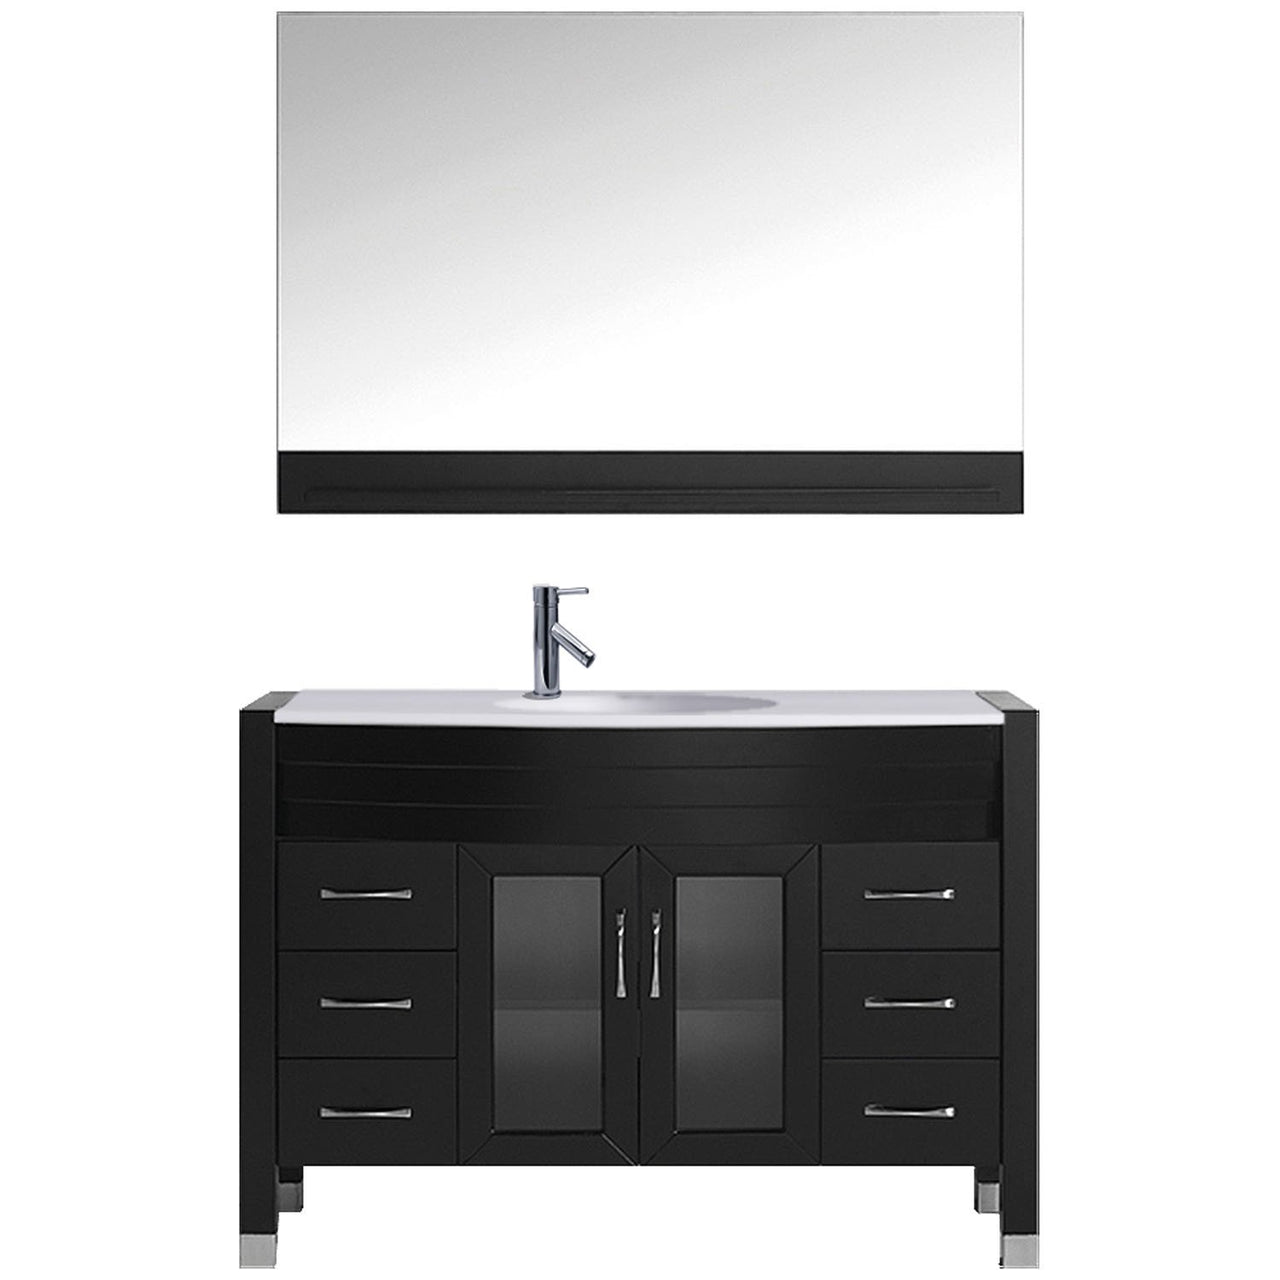 Virtu USA Ava 48" Single Round Sink Espresso Top Vanity in Espresso with Polished Chrome Faucet and Mirror Vanity Virtu USA 